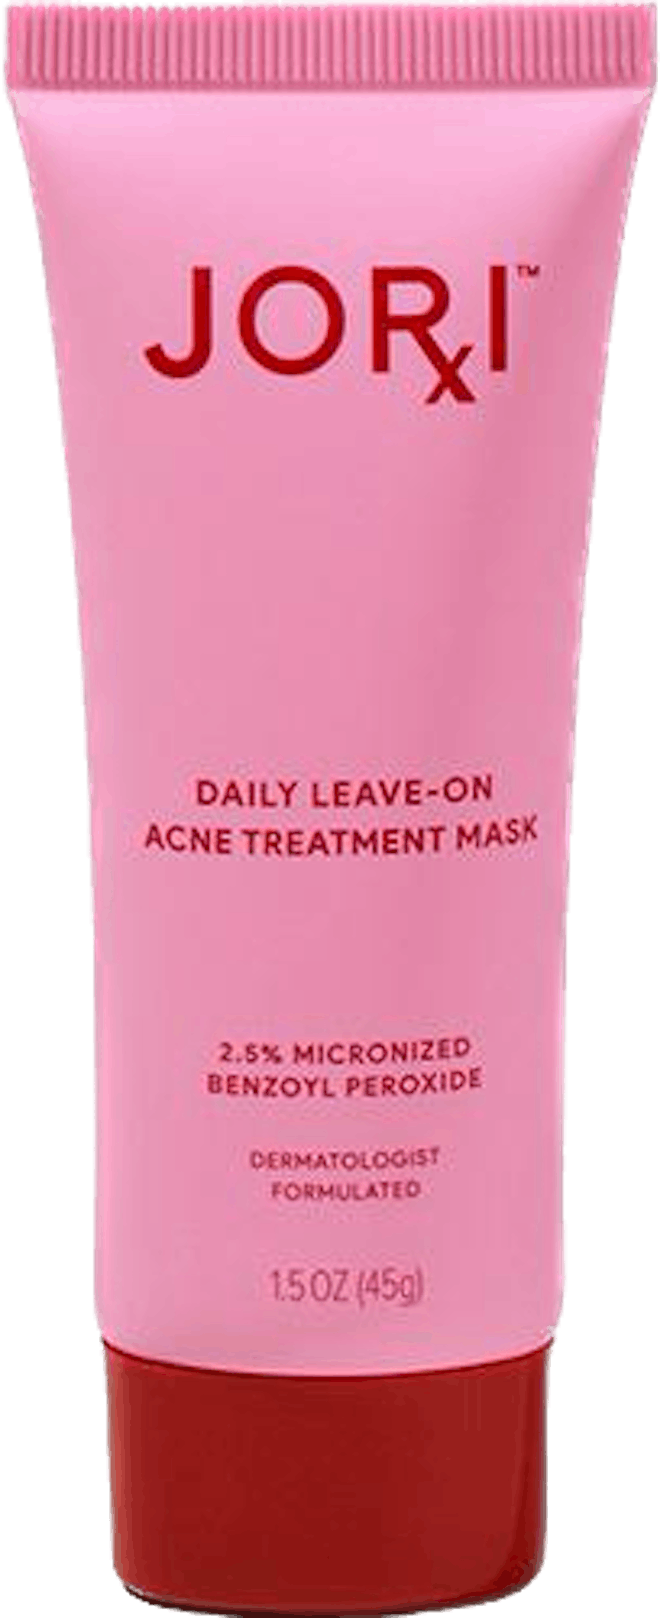 JORI Daily Leave-On Acne Treatment Mask with 2.5% Micronized Benzoyl Peroxide + Botanicals for Adult...